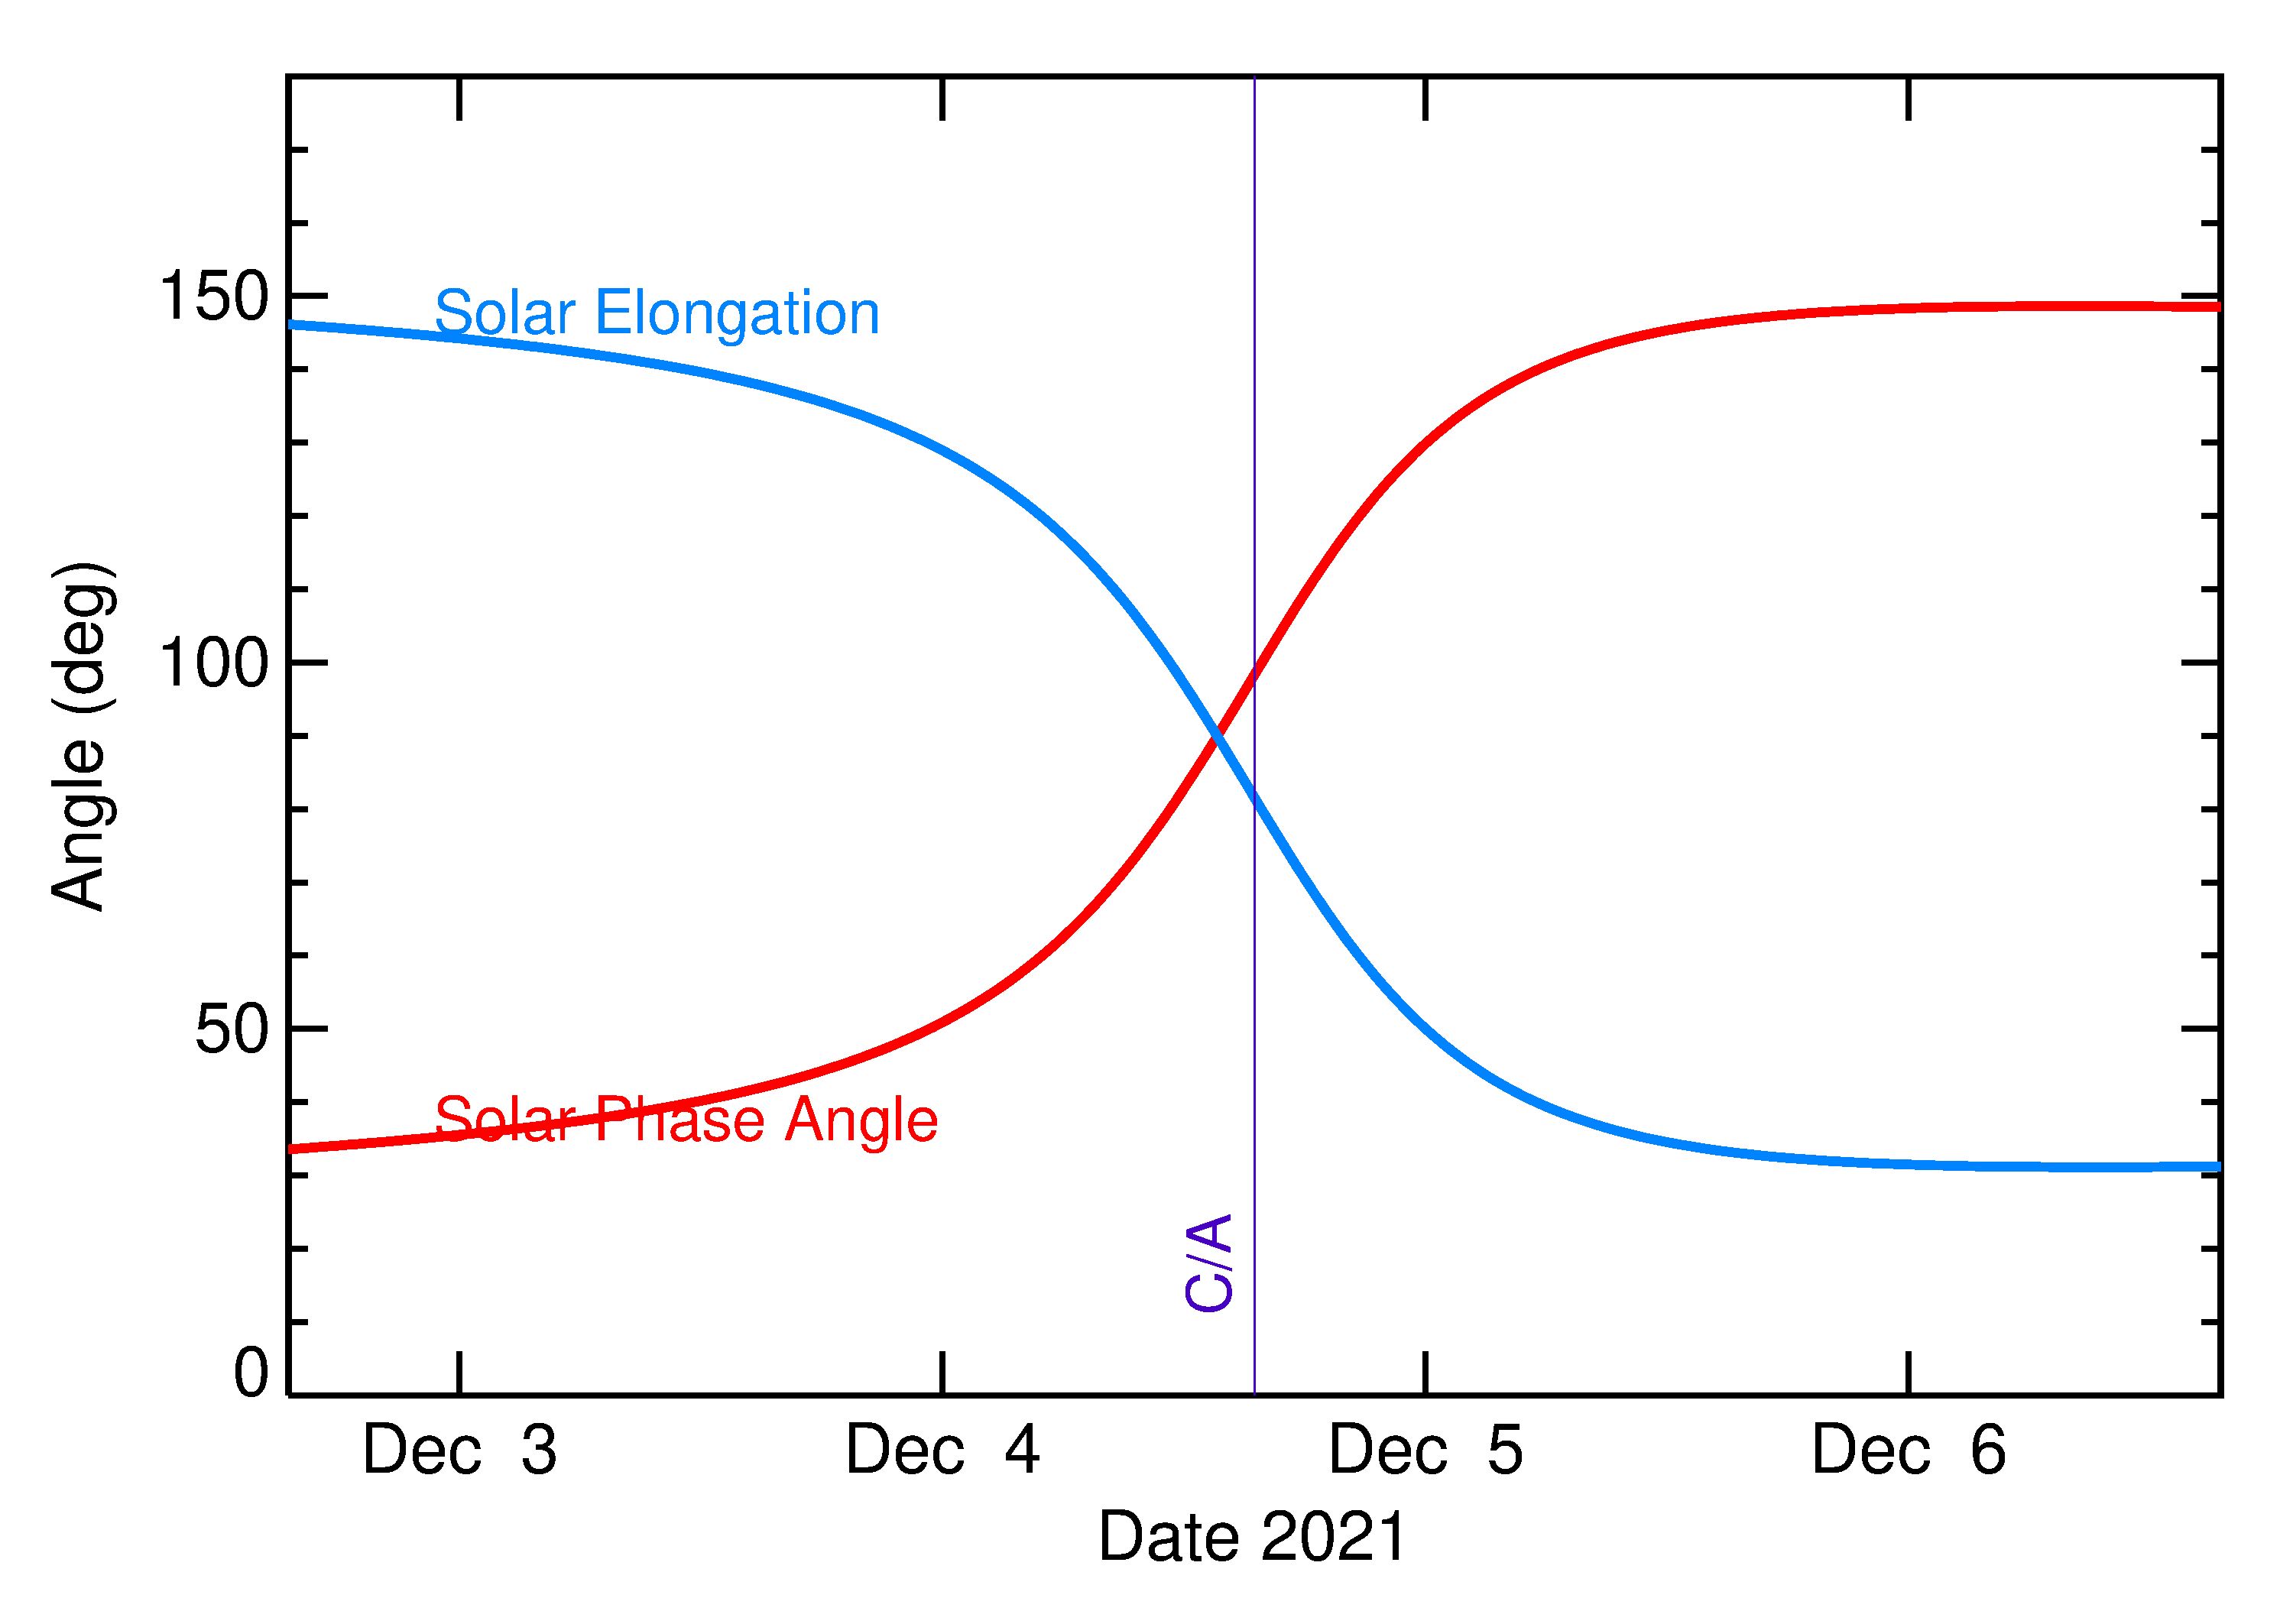 Solar Elongation and Solar Phase Angle of 2021 XF1 in the days around closest approach